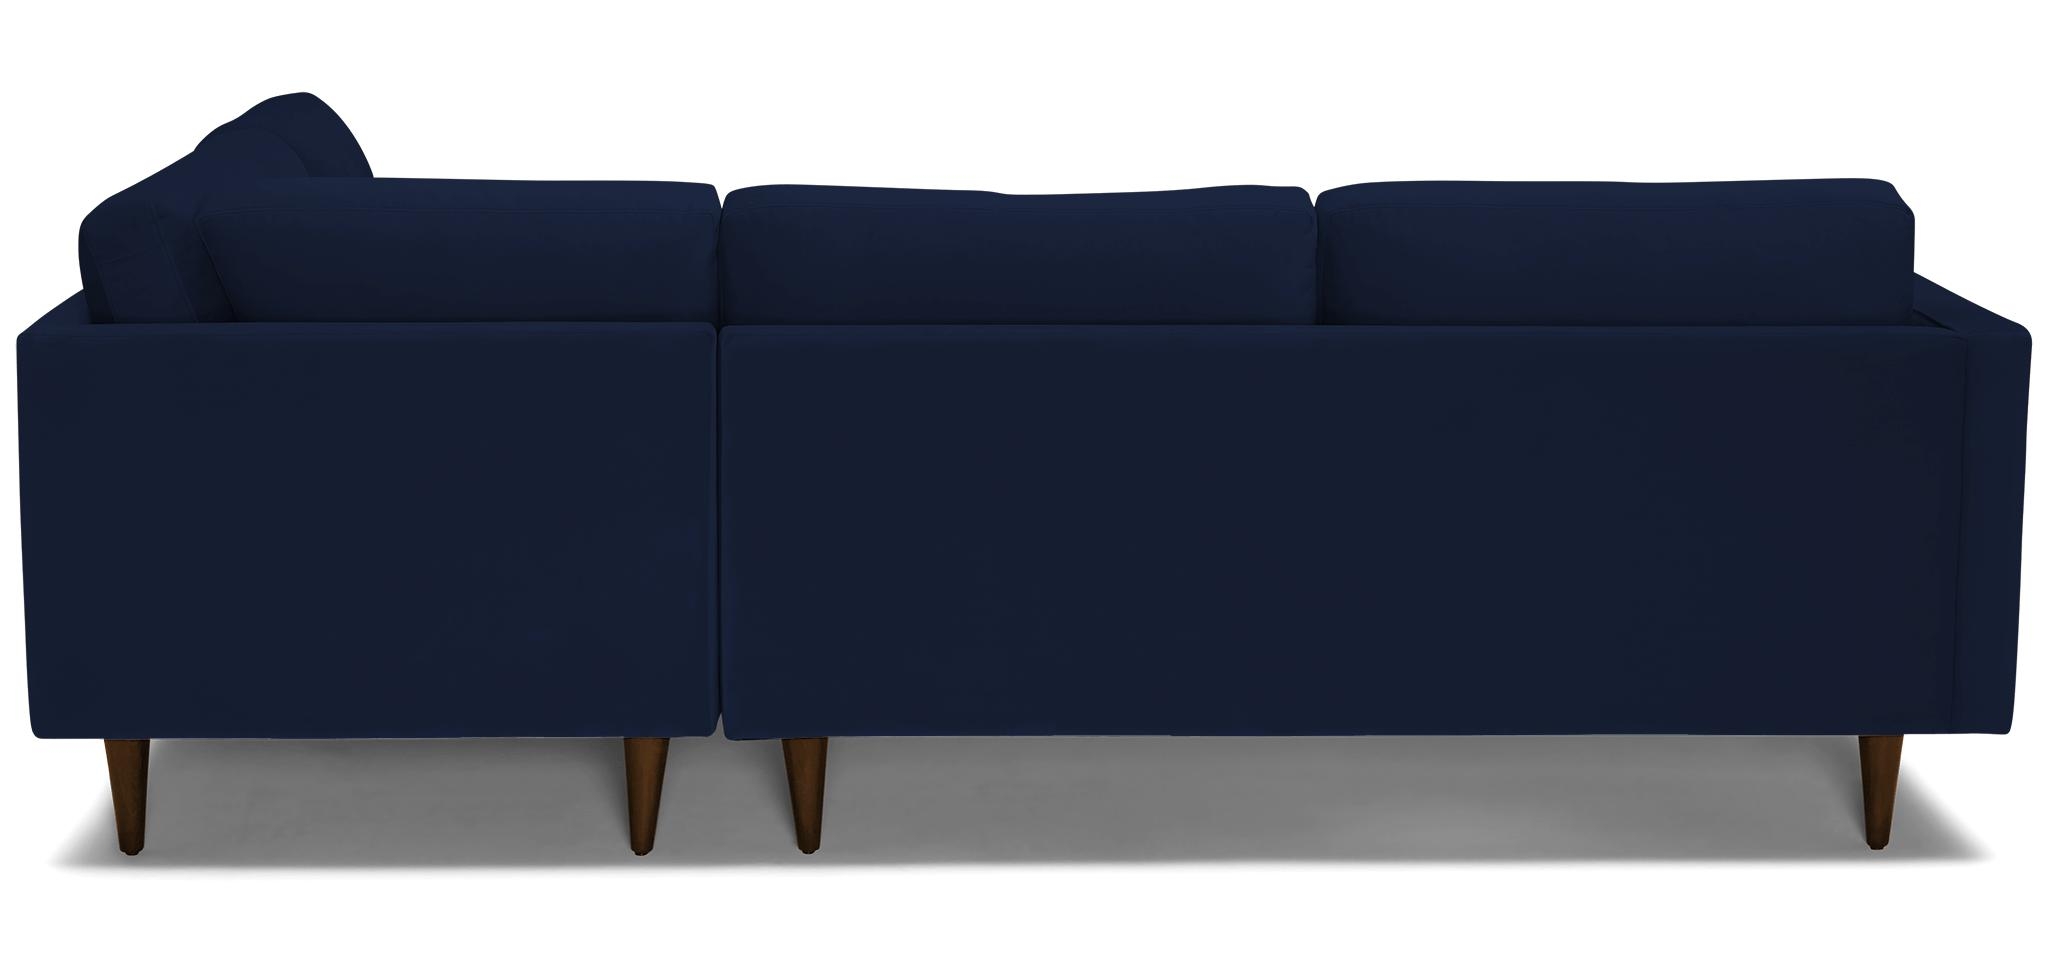 Blue Briar Mid Century Modern Sectional with Bumper - Royale Cobalt - Mocha - Right  - Image 4